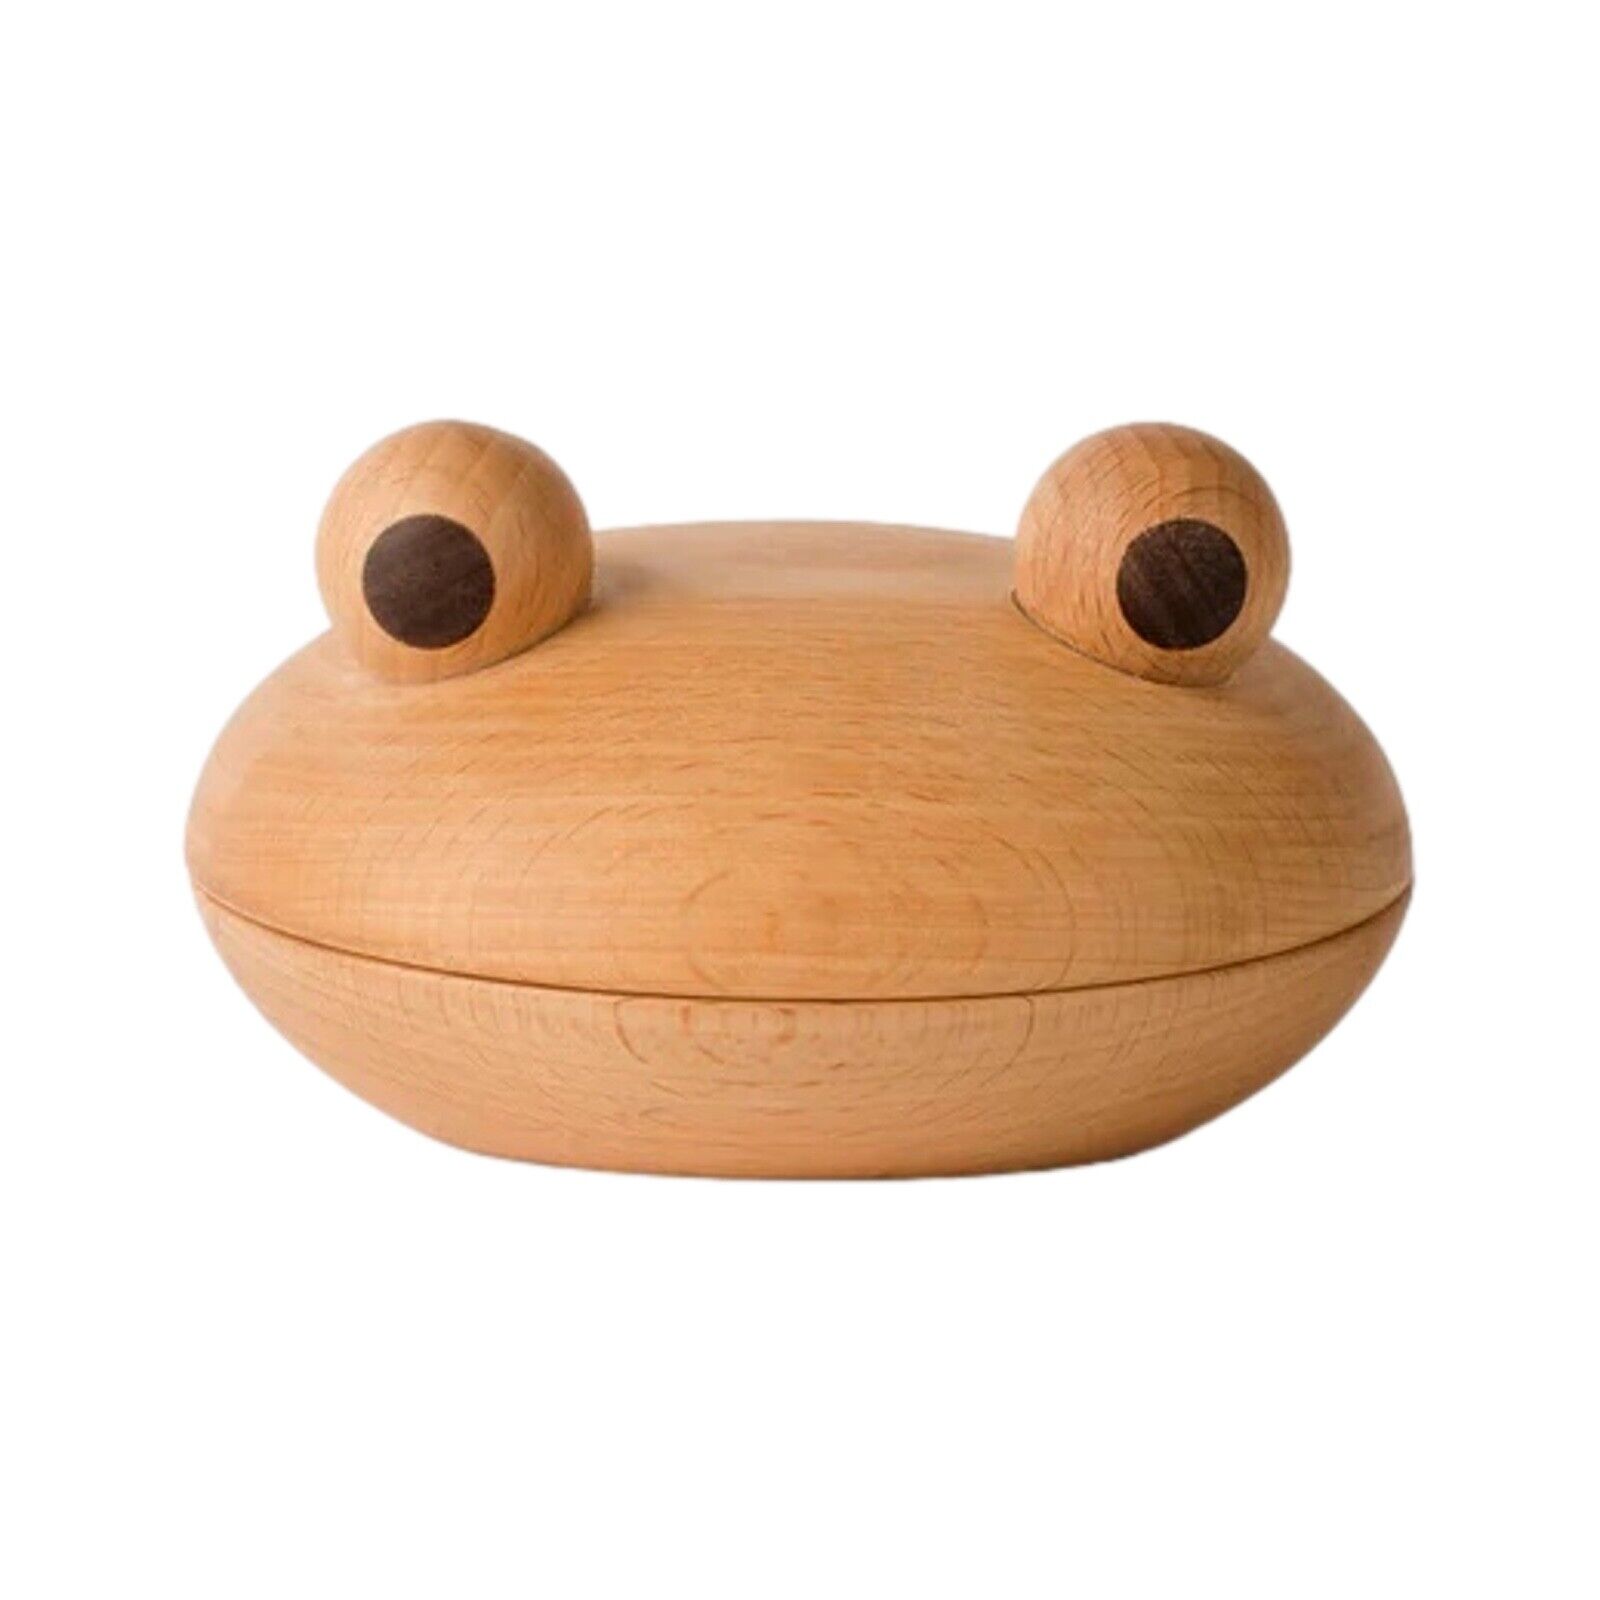 Frog Bowl By Spring Copenhagen Made From Walnut And Beech Danish Design